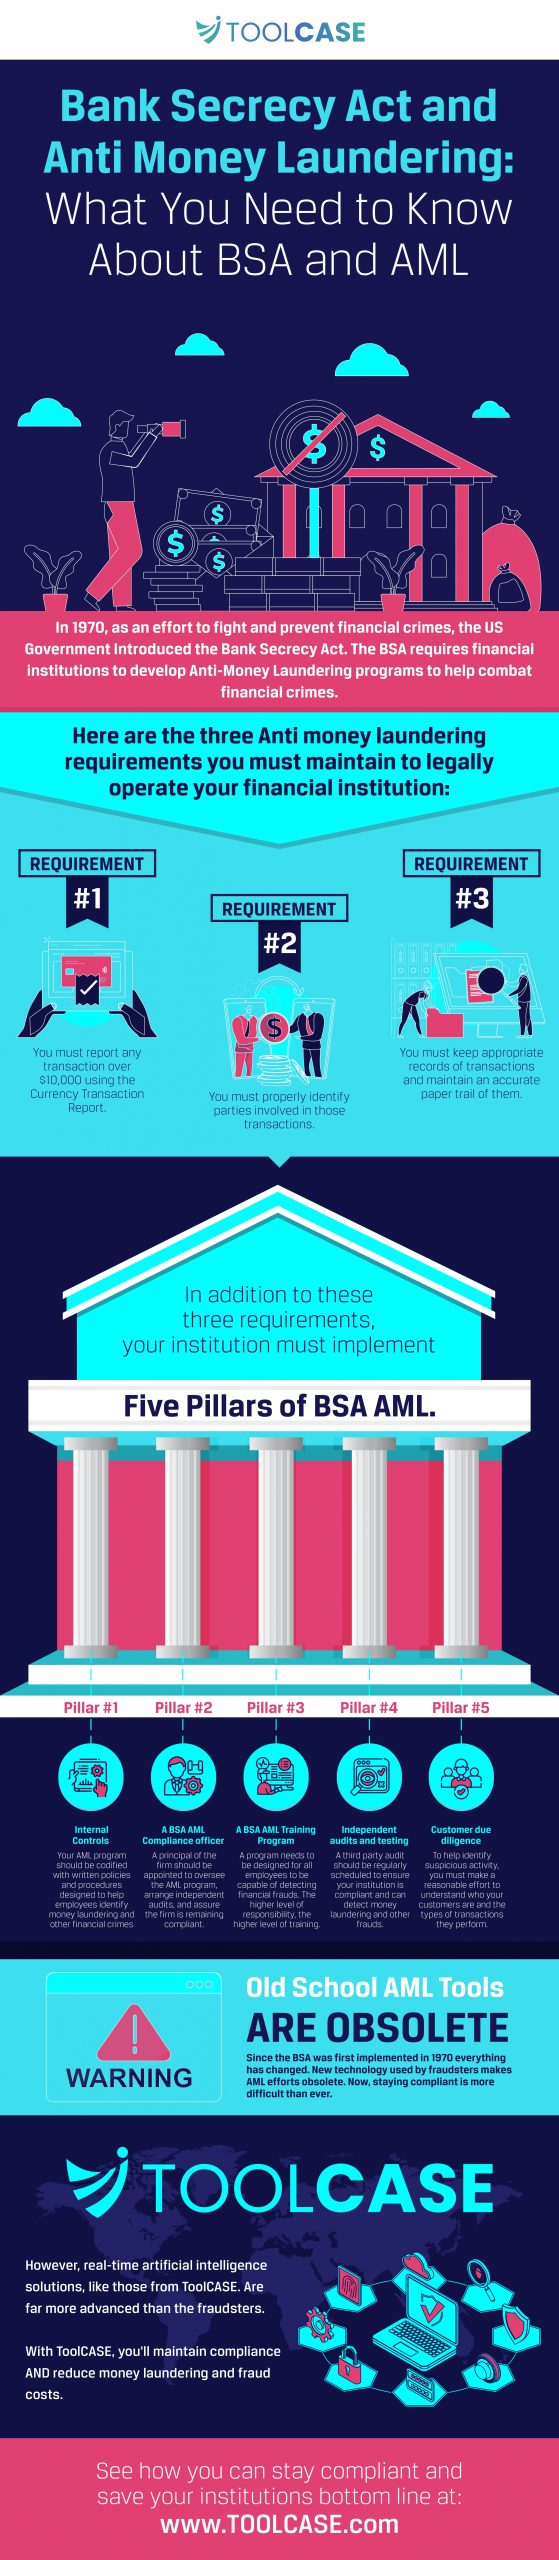 Bank Secrecy Act and Anti Money Laundering: What You Need to Know About BSA and AML